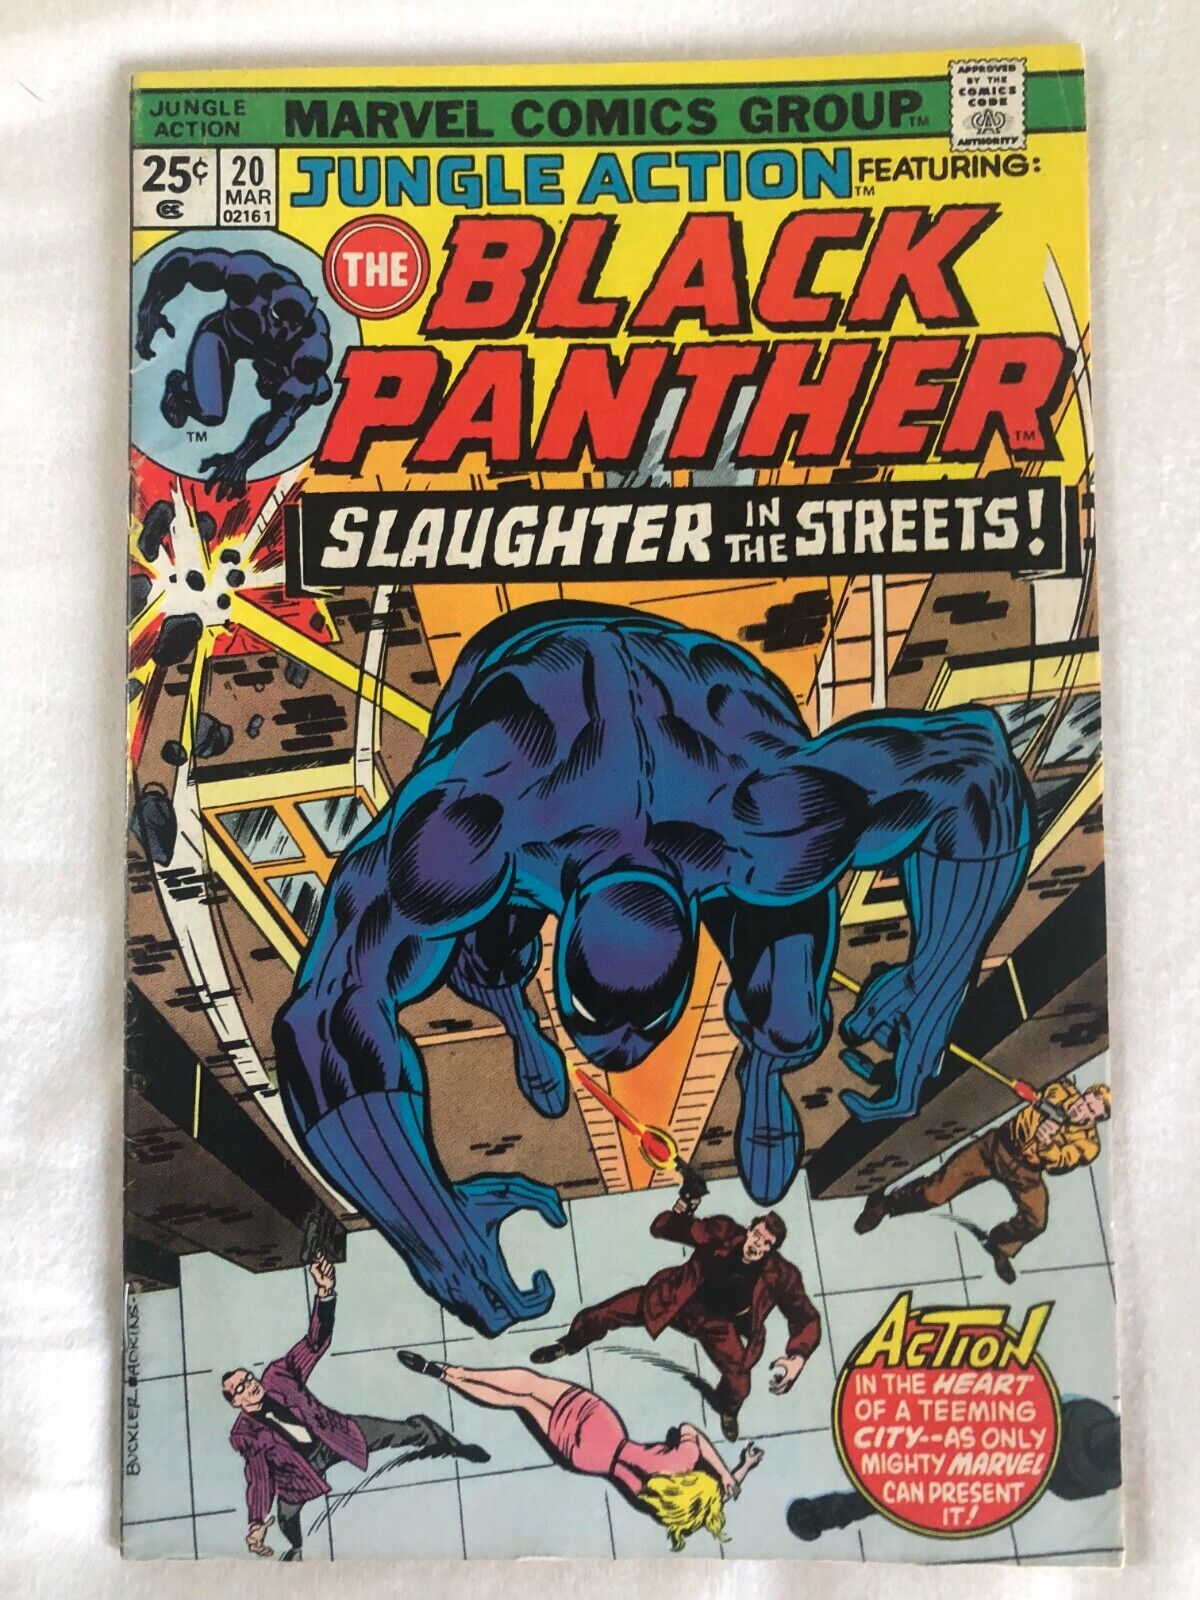 JUNGLE ACTION featuring BLACK PANTHER #20 - (1976) - Marvel Comics